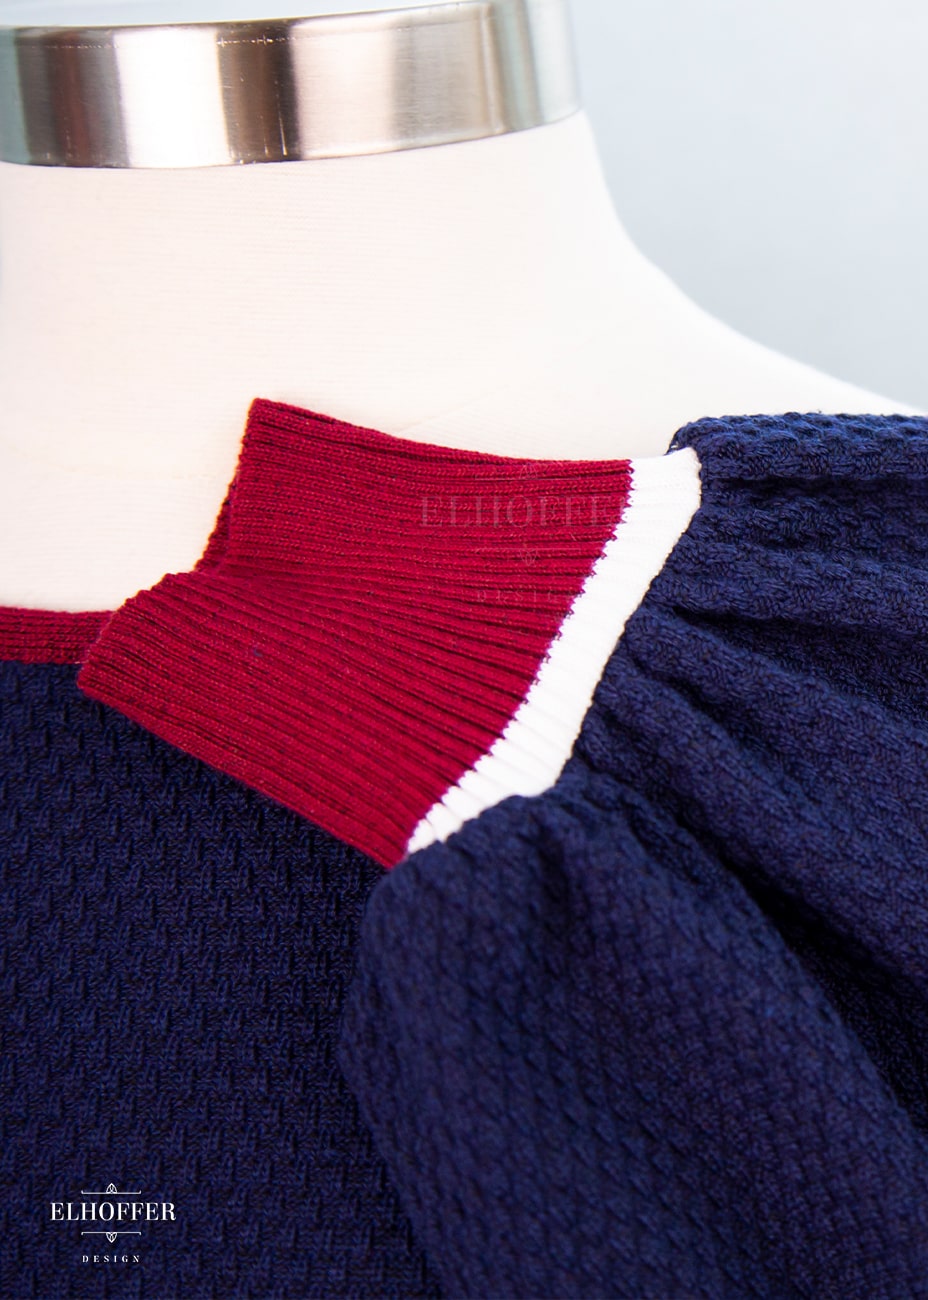 Close up of red cuff with white stripe detailing and blue waffle knit texture of sleeve.